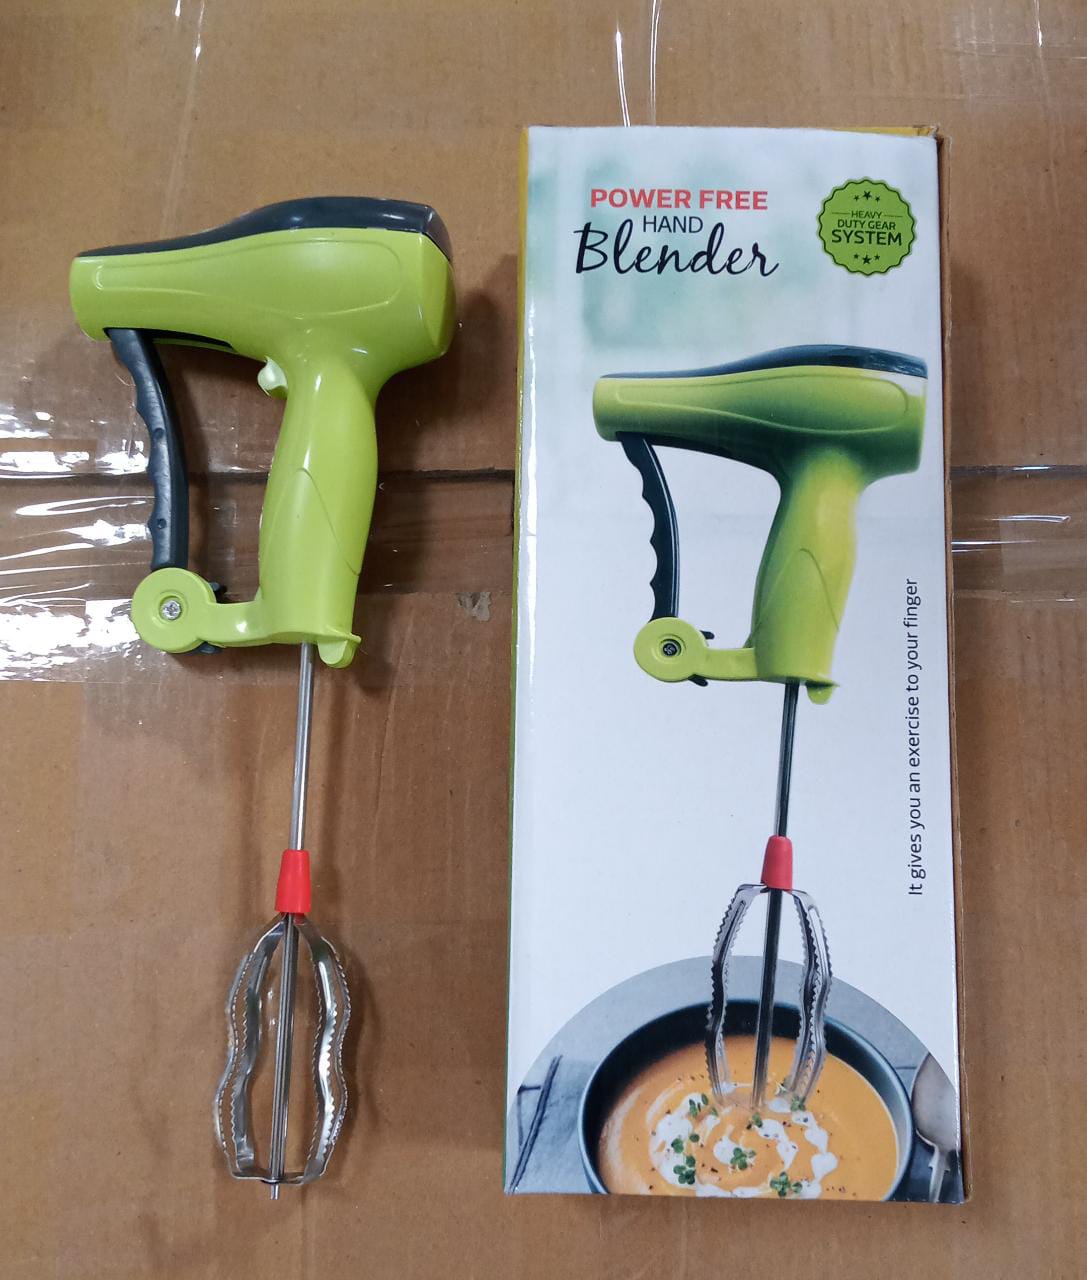 0723A Power Free Manual Hand Blender with Stainless Steel Blades, Milk Lassi Maker, Egg Beater Mixer Rawai